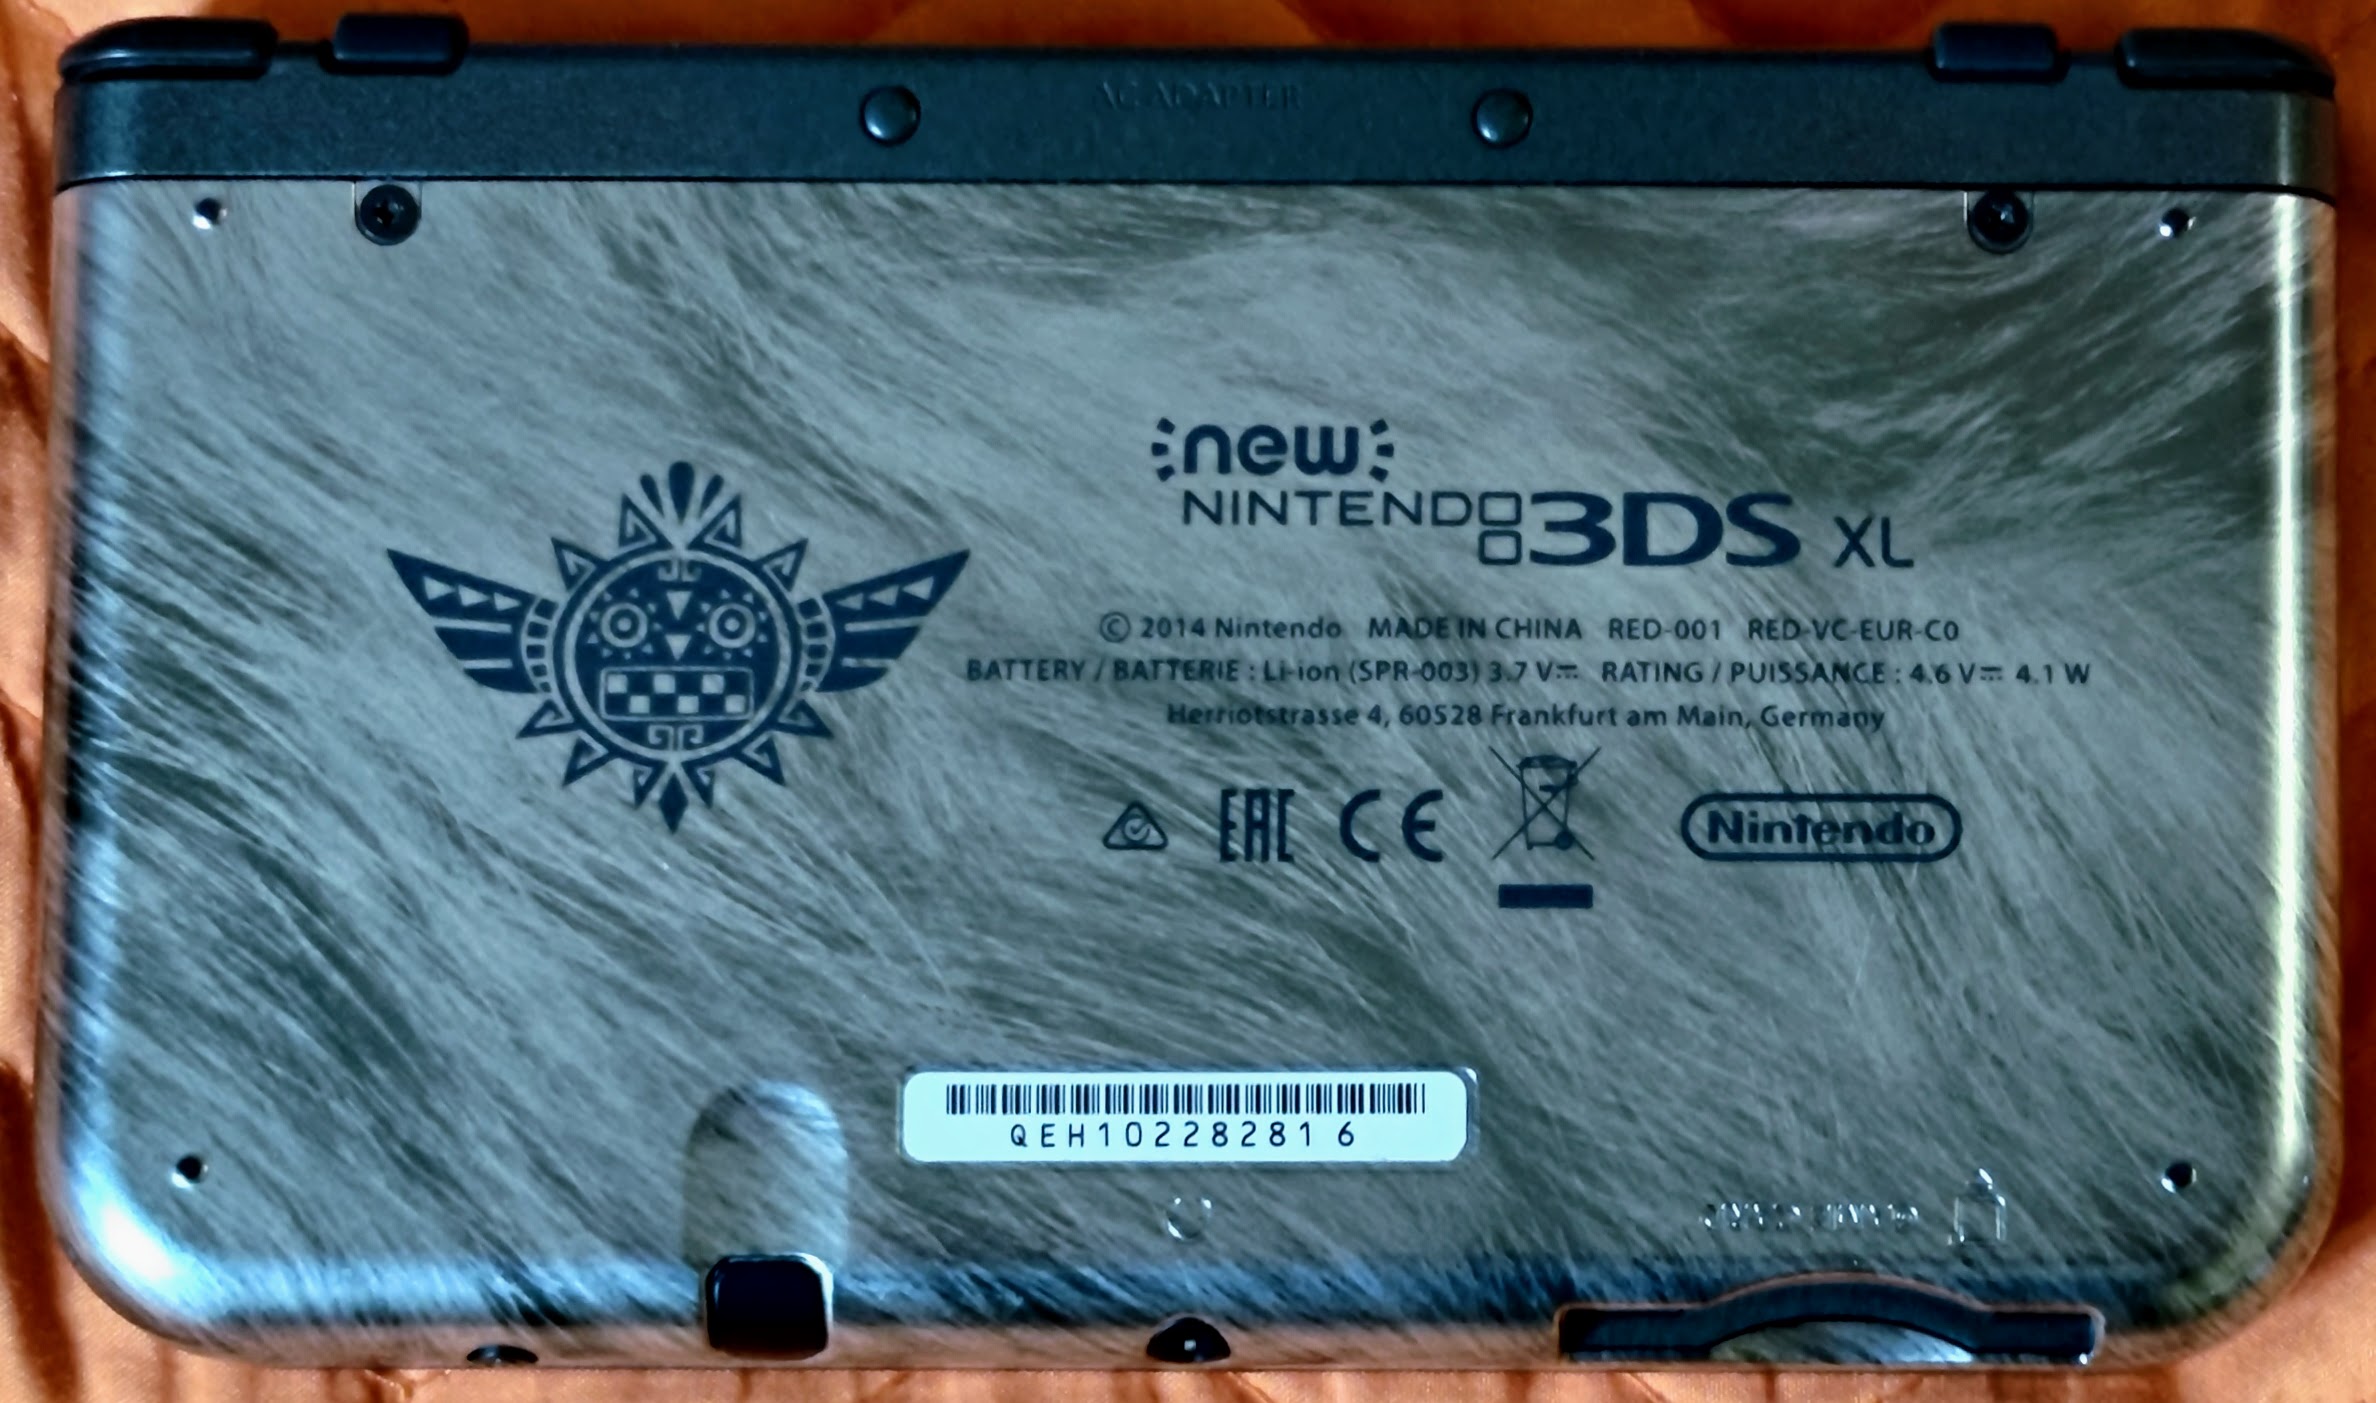 New Nintendo 3DS XL "Monster Hunter 4 Ultimate Edition"